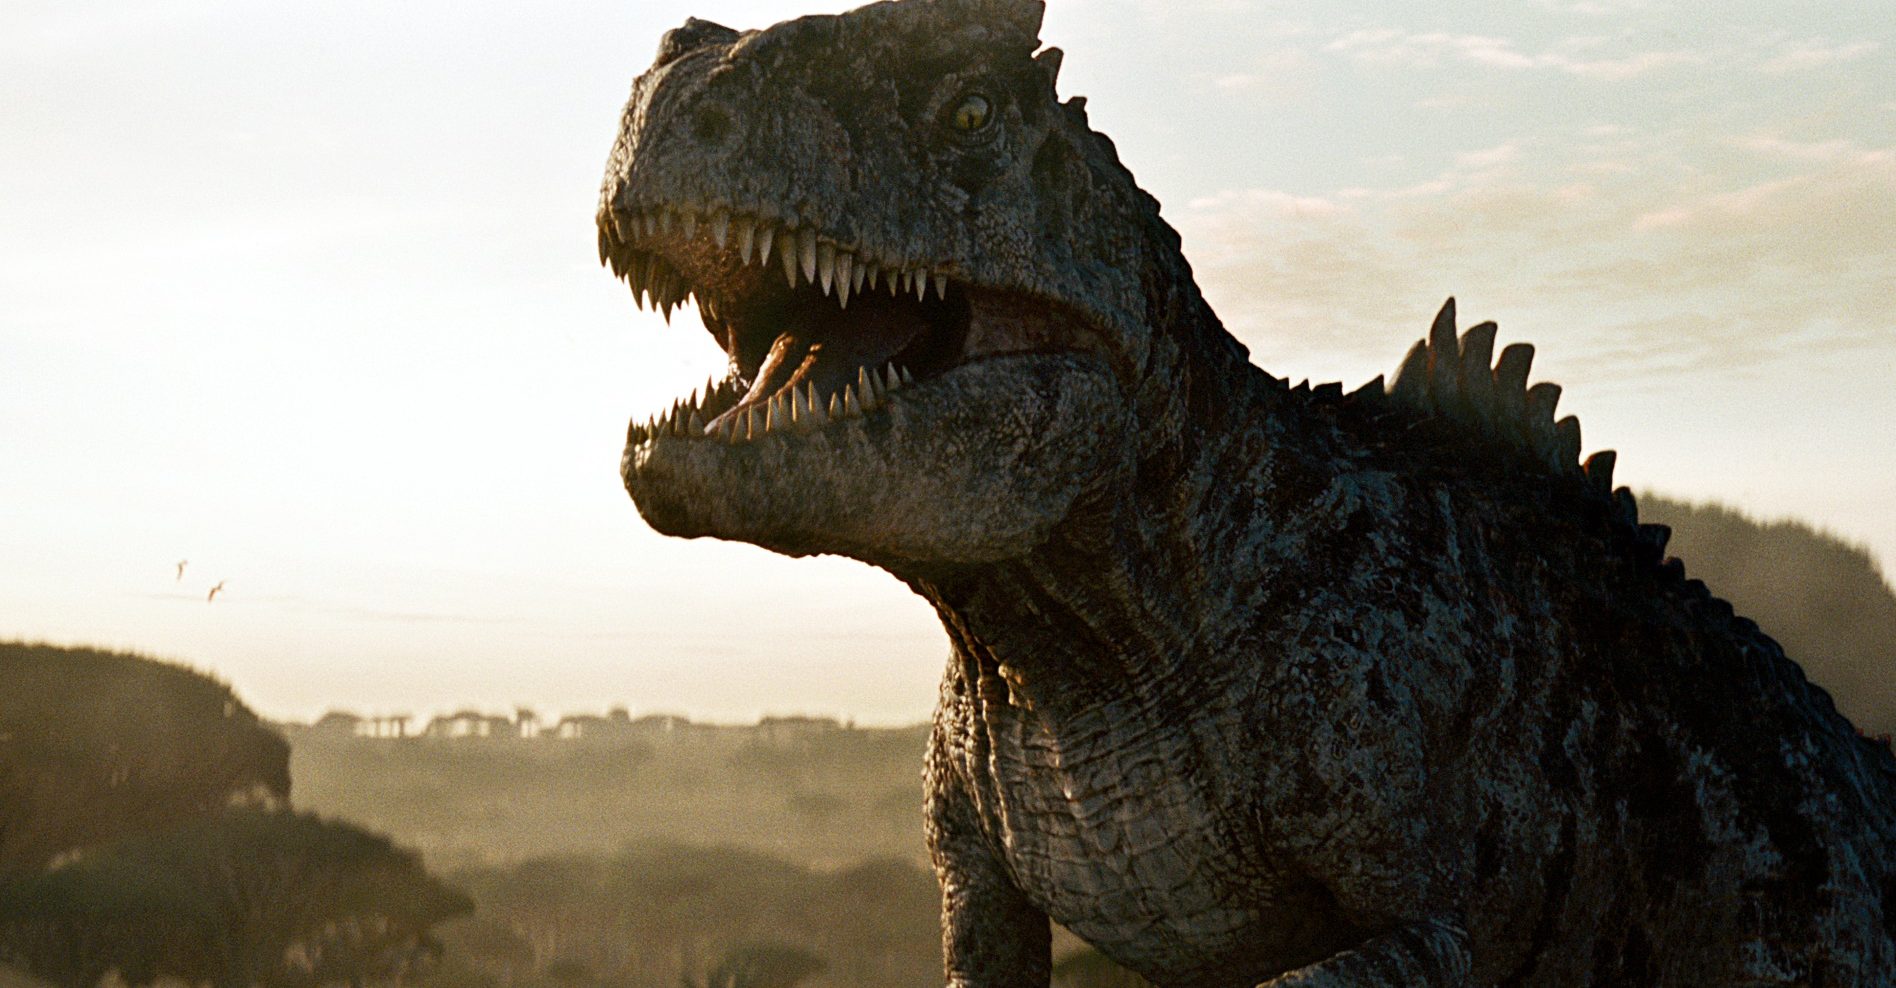 Jurassic World Dominion roars to an estimated $143.37 million domestic opening weekend